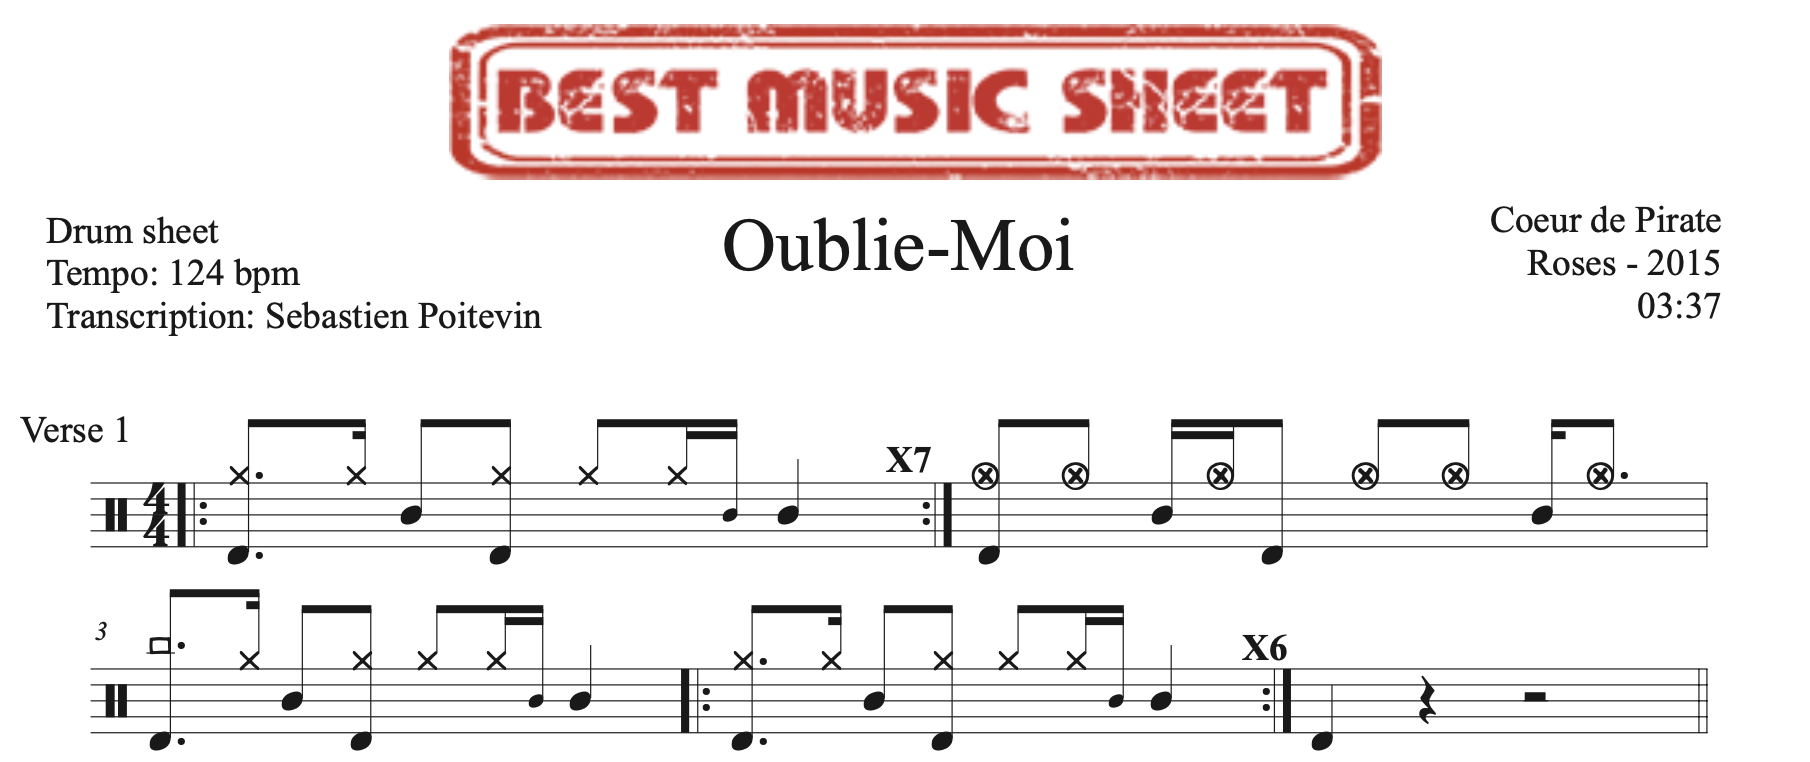 Sample drum sheet of Oublie Moi by Coeur De Pirate